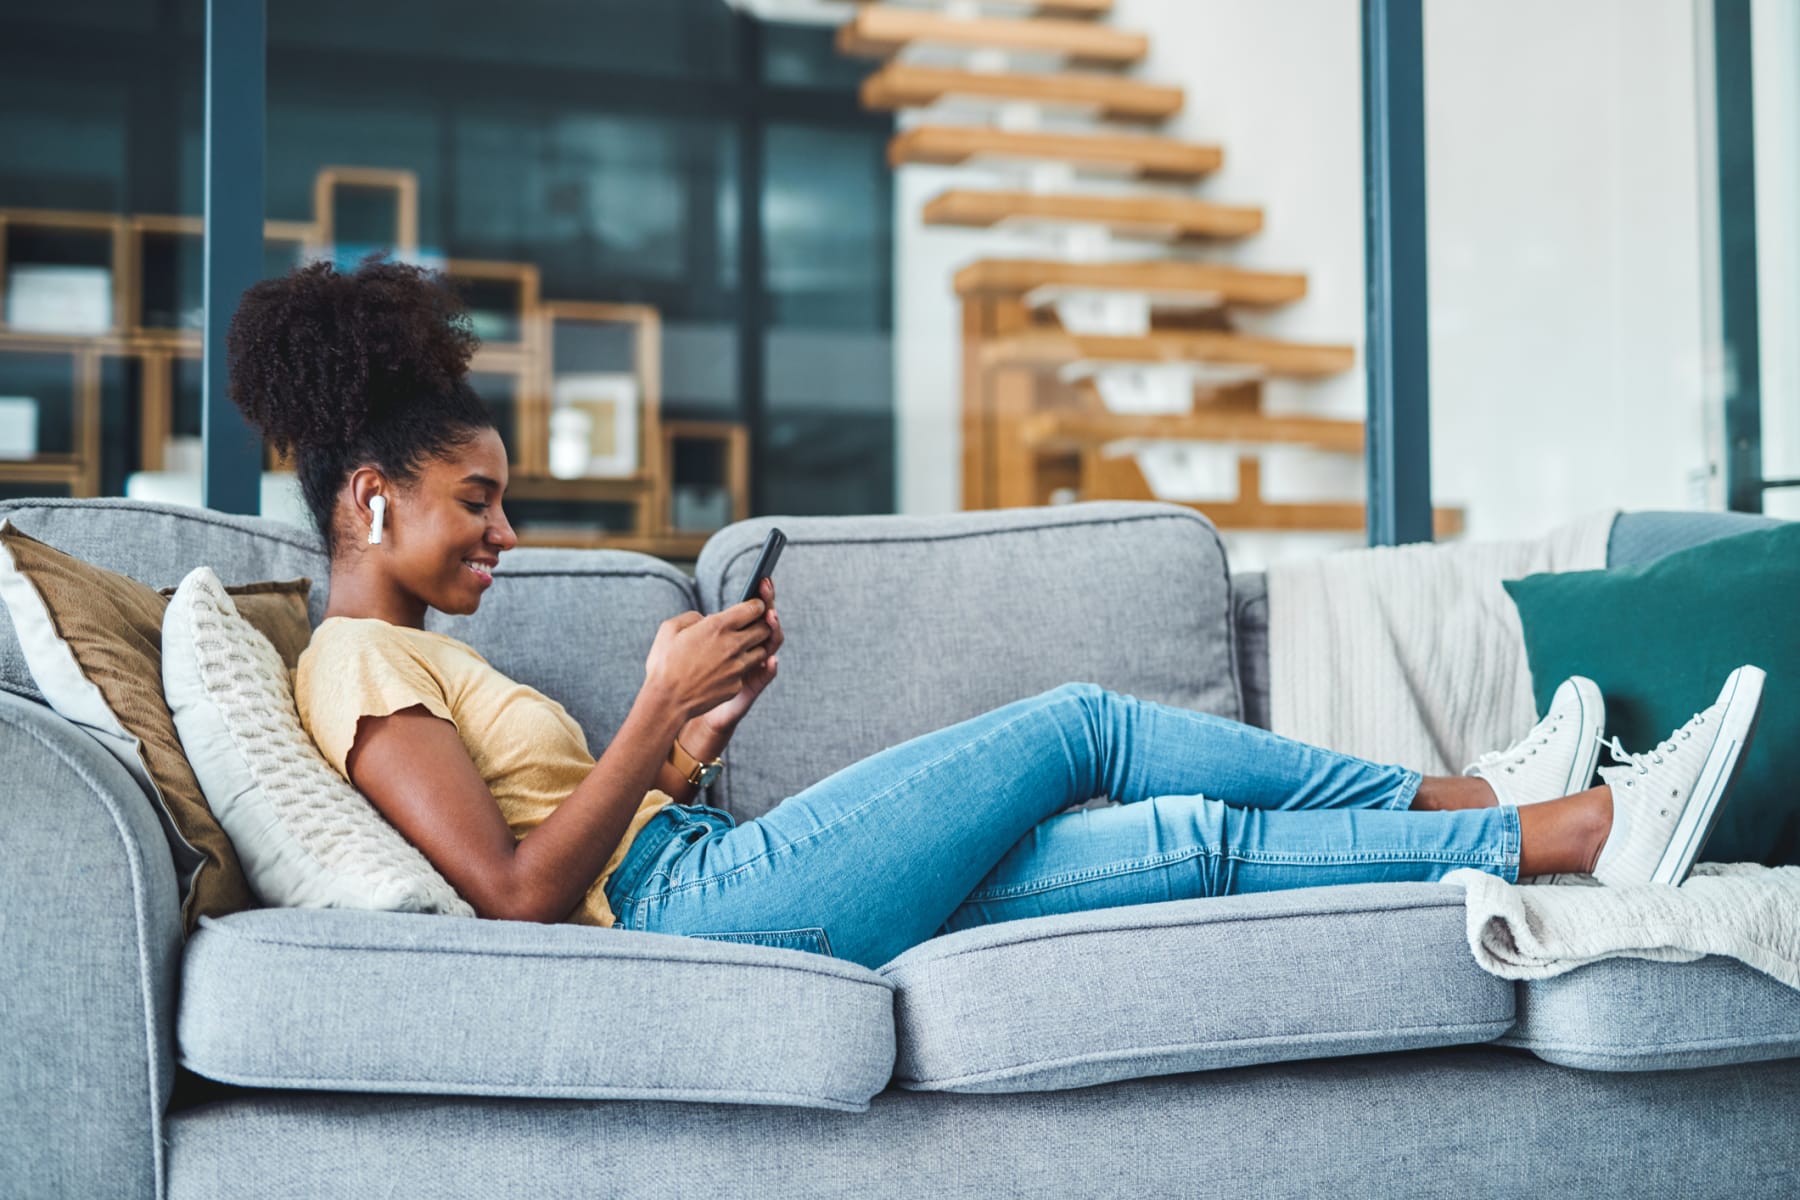 Young woman using smartphone and wireless earphones on couch.